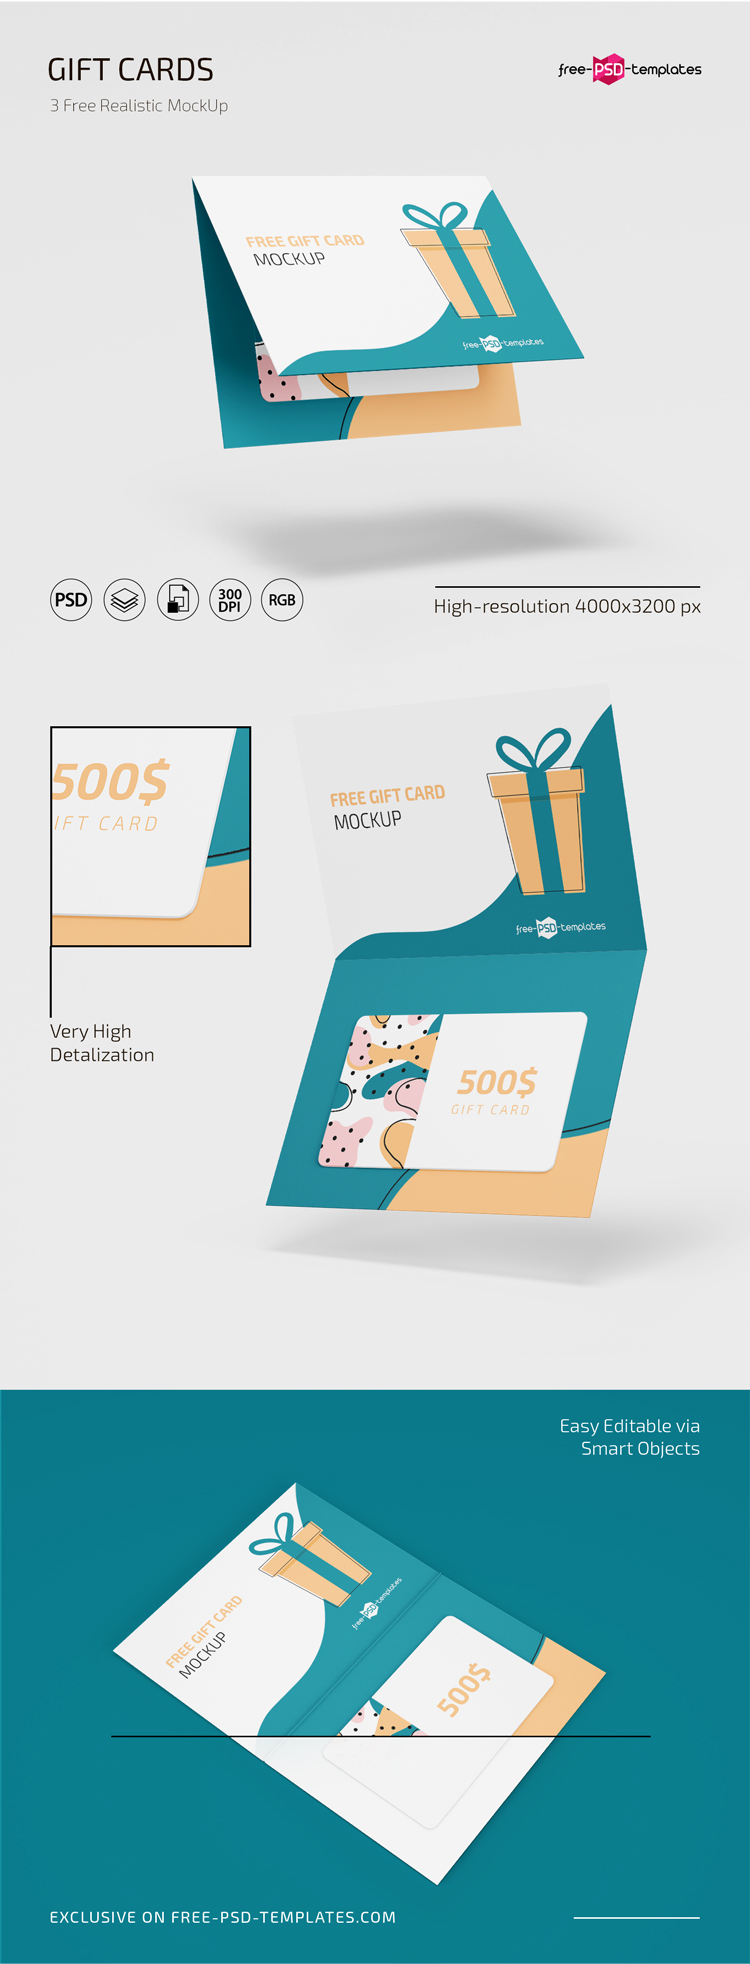 Download Free PSD Gift Cards Mockup Set | Free PSD Templates